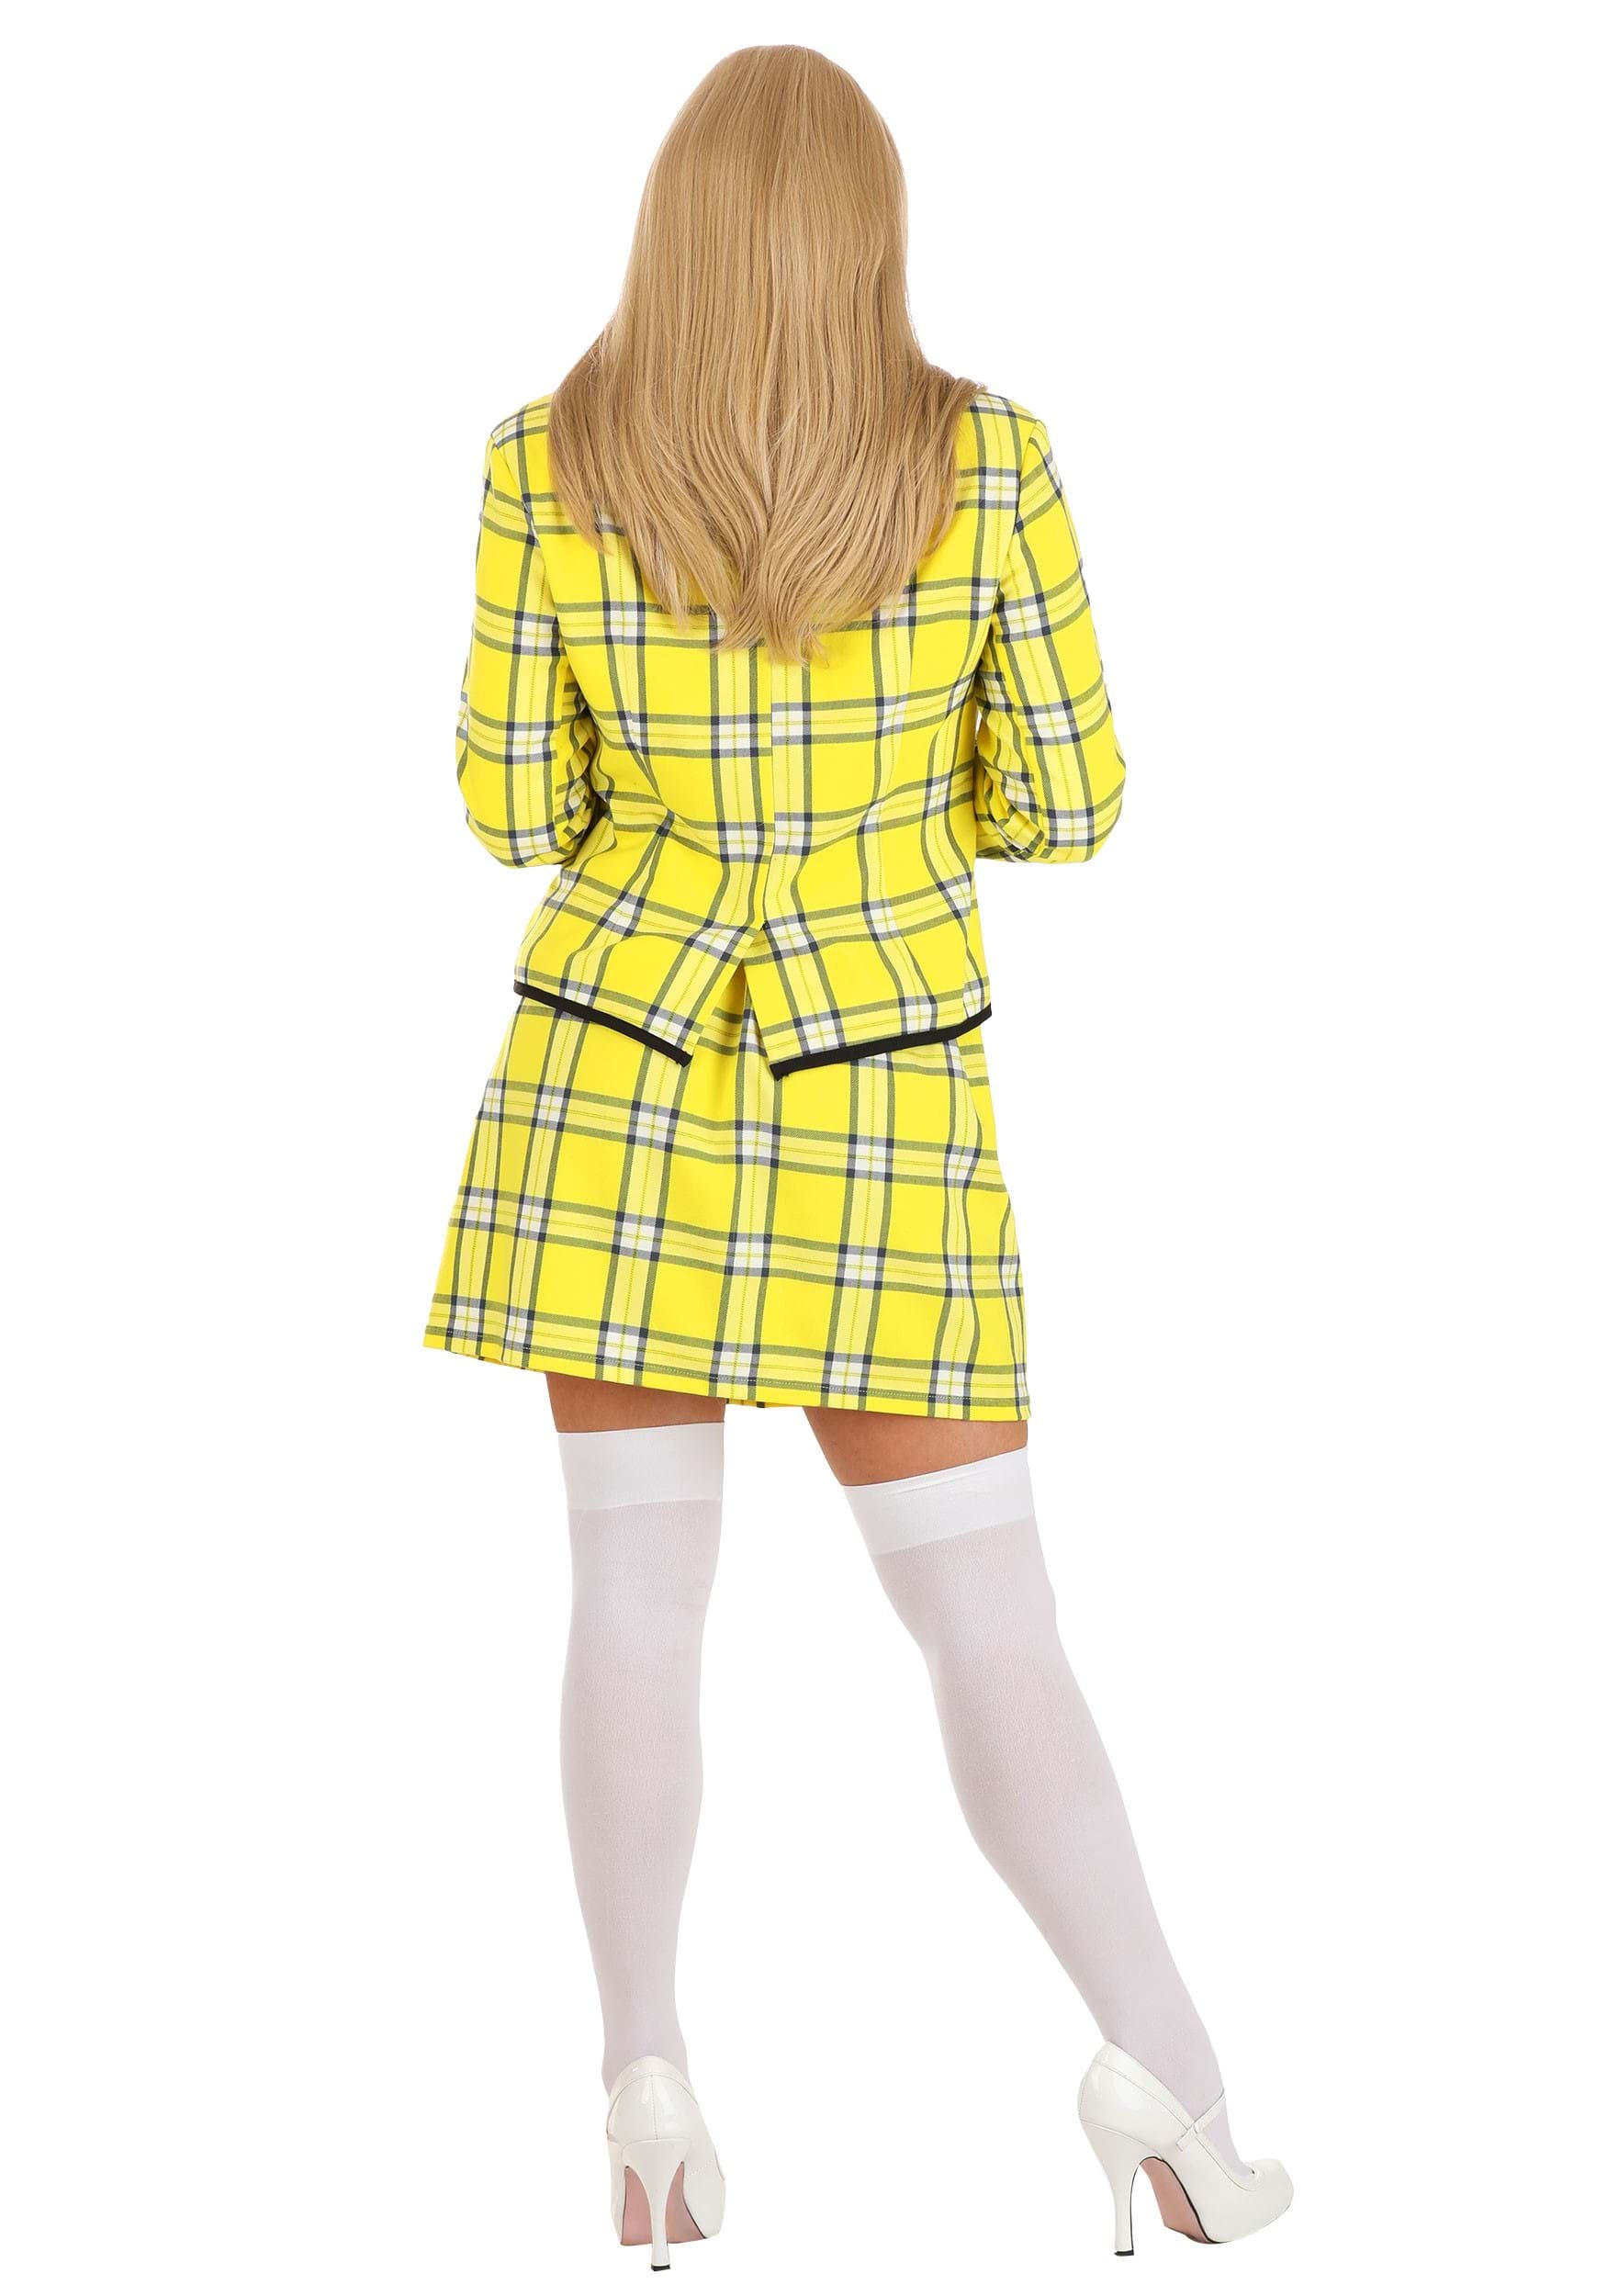 Authentic Clueless Cher Fancy Dress Costume For Women